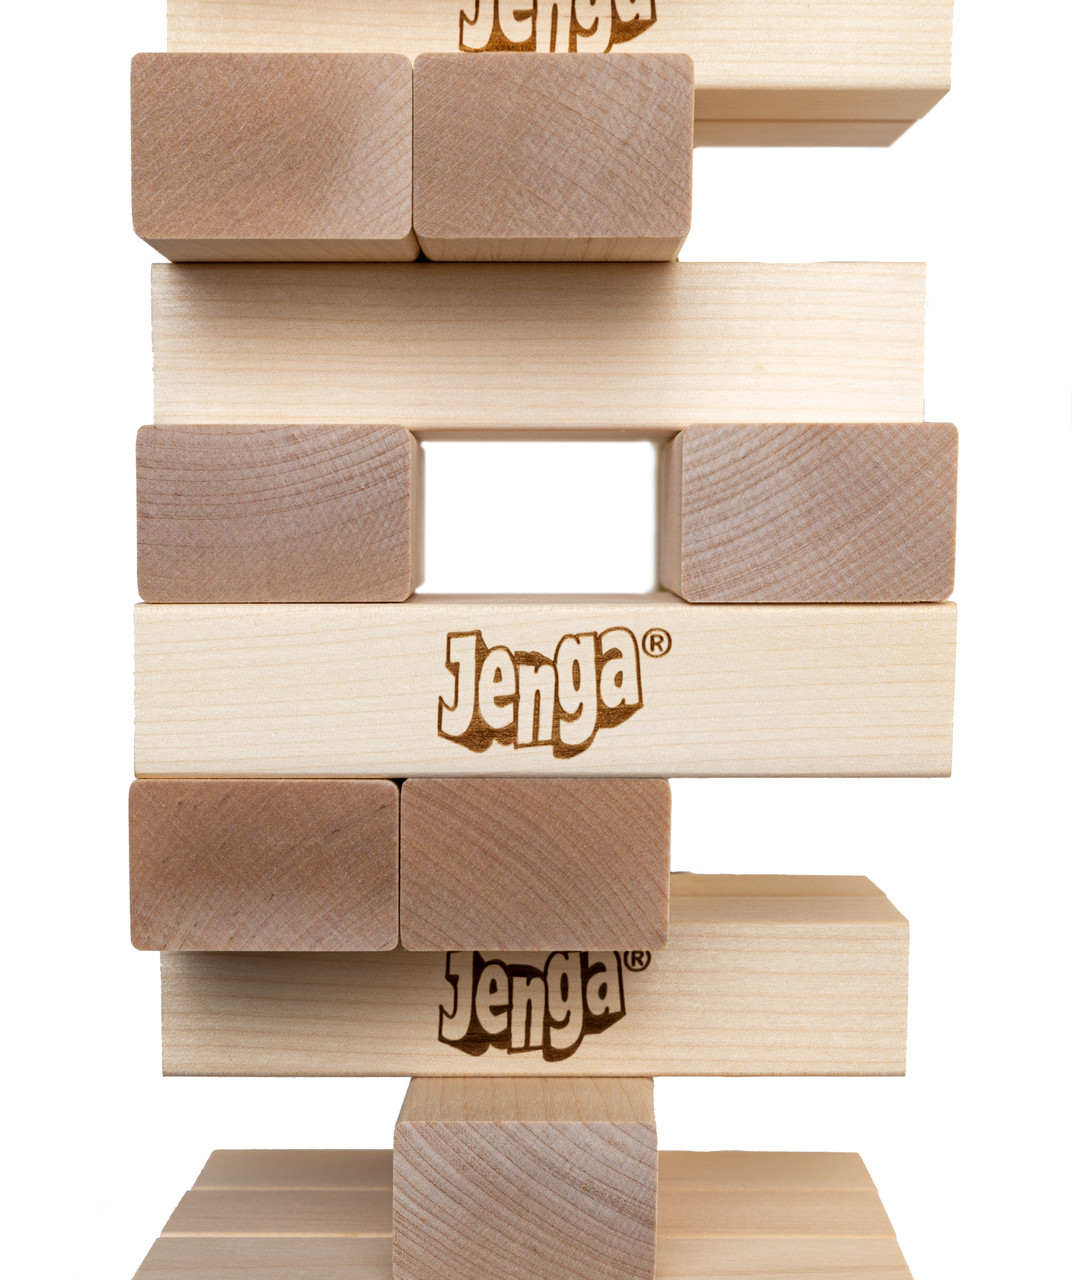 Jenga Official Giant JS6 - Extra Large Size Stacks to Over 4 feet, Includes  Heavy-Duty Carry Bag, Premium Hardwood Blocks, Splinter Resistant